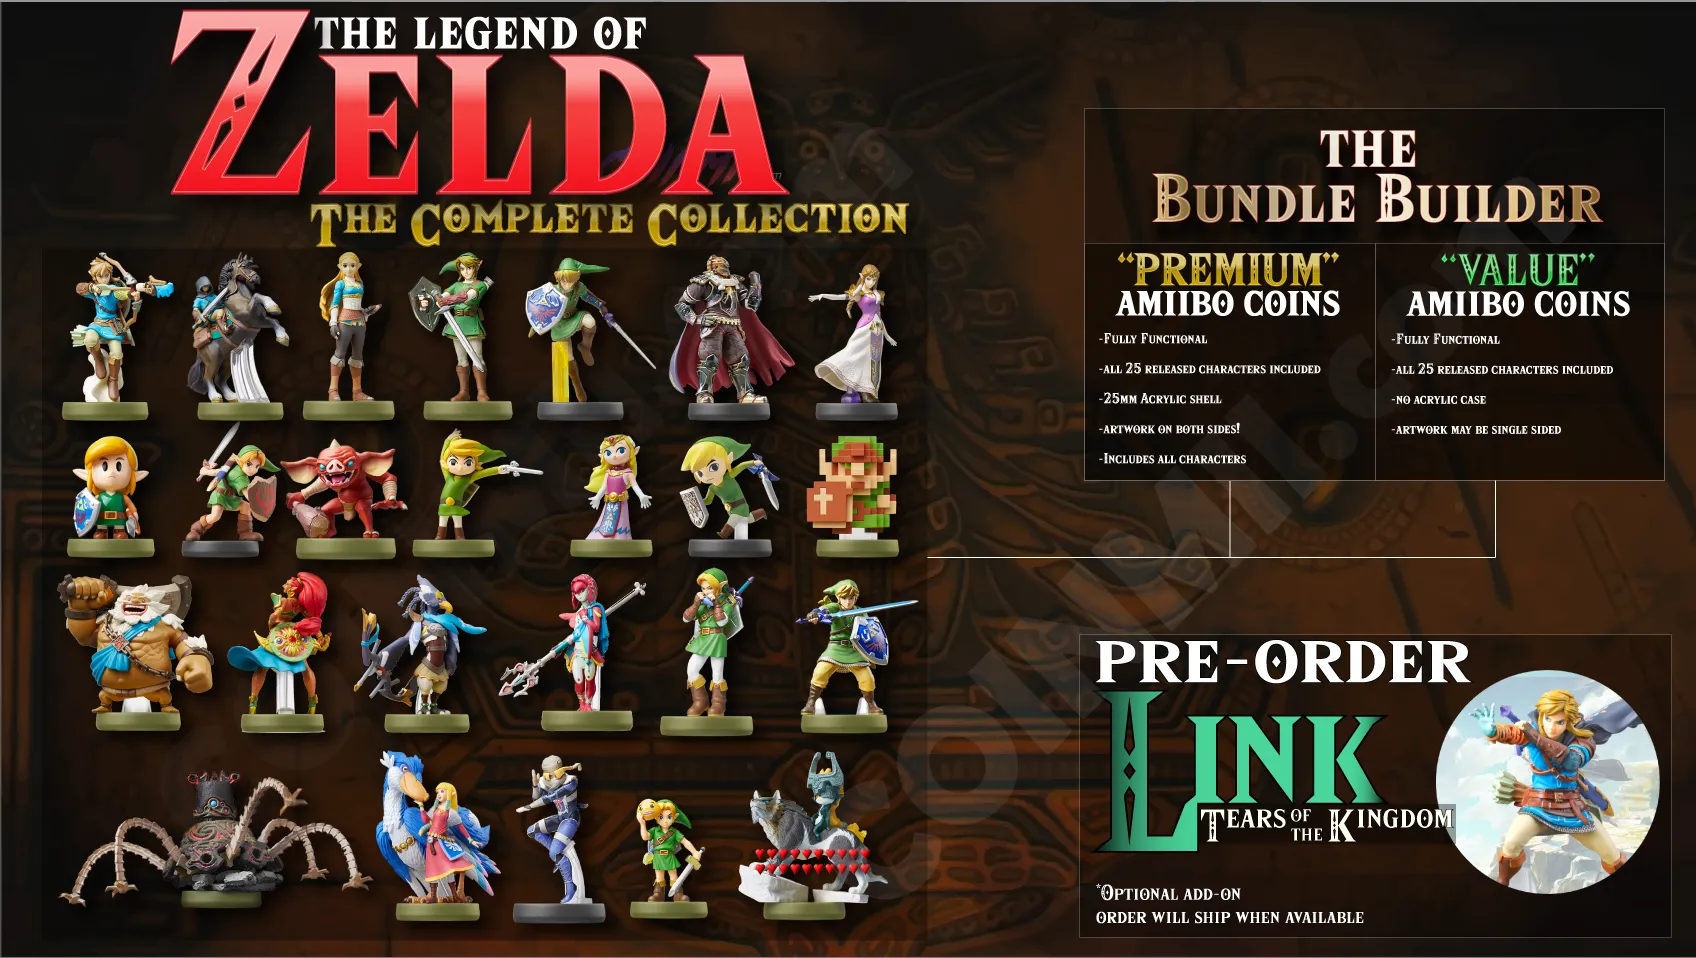 legend of zelda: complete collection + new link tears of the kingdom amiibo coin preorder